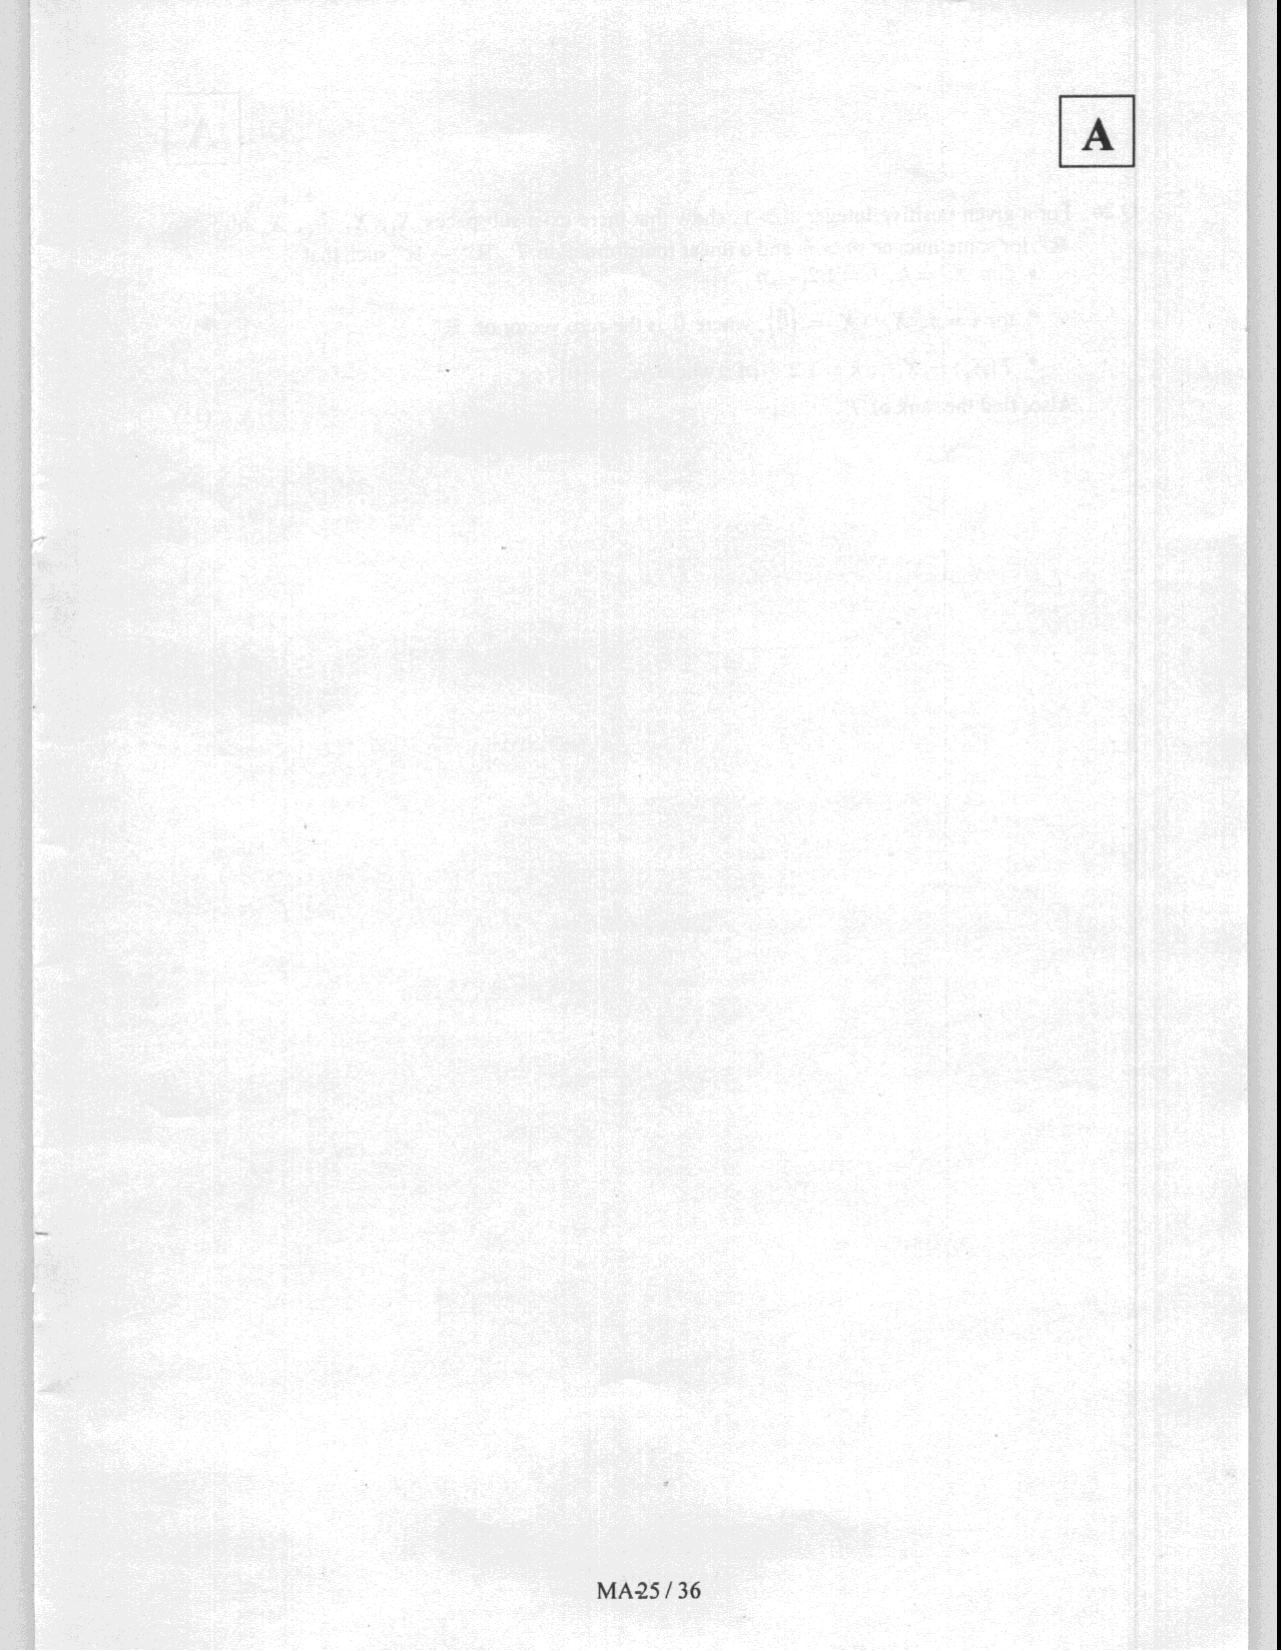 JAM 2008: MA Question Paper - Page 27